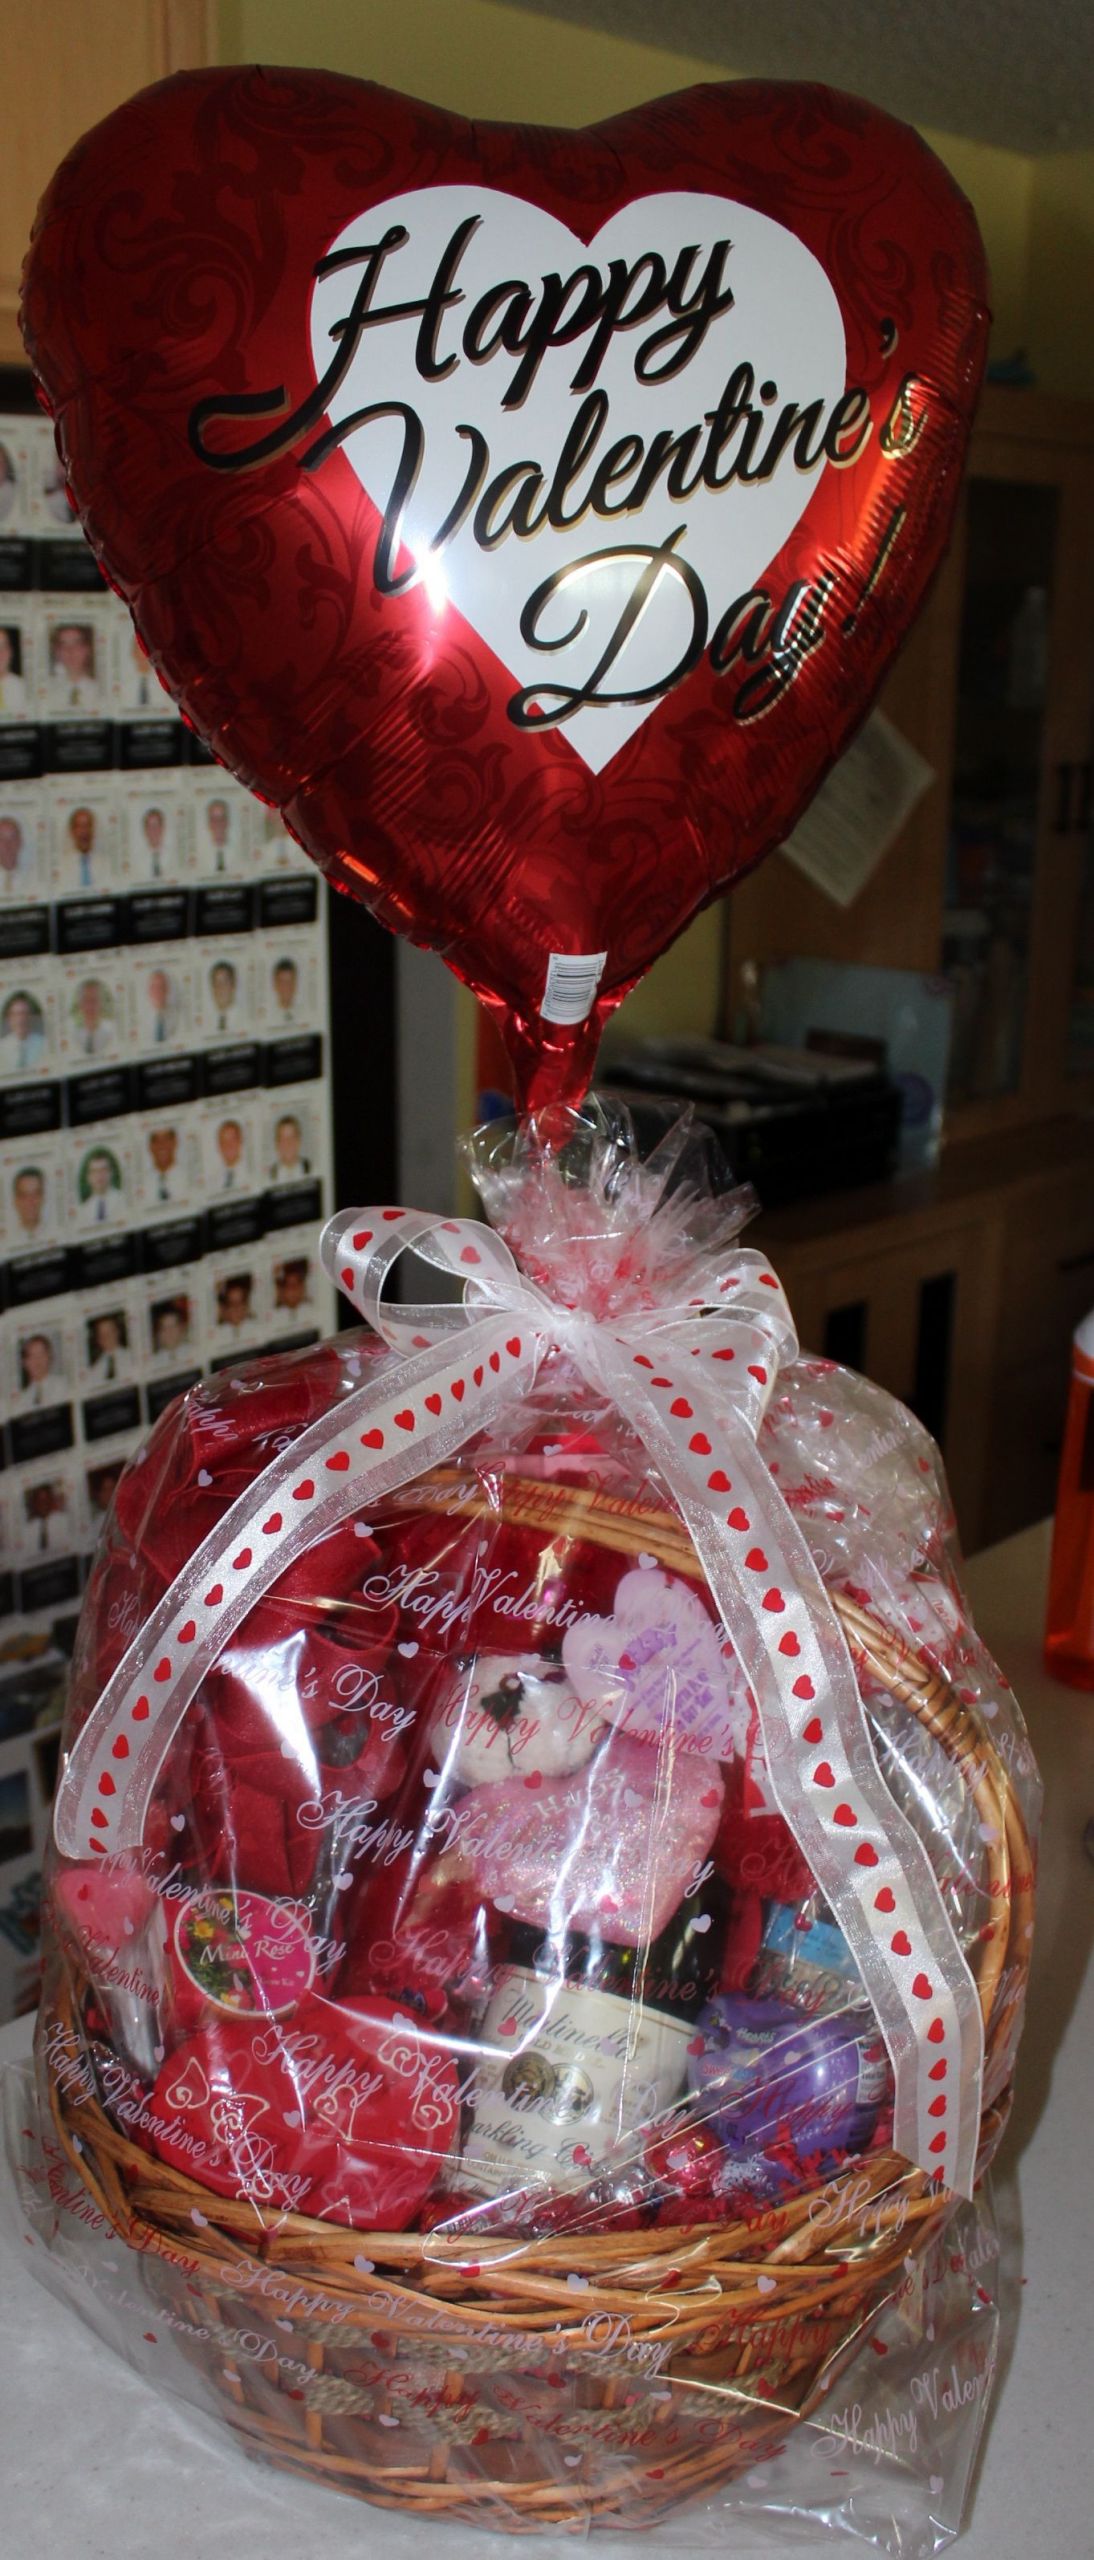 Valentine Gift Ideas For Women
 47 How To Make A Valentine Gift Basket For Her Best Idea